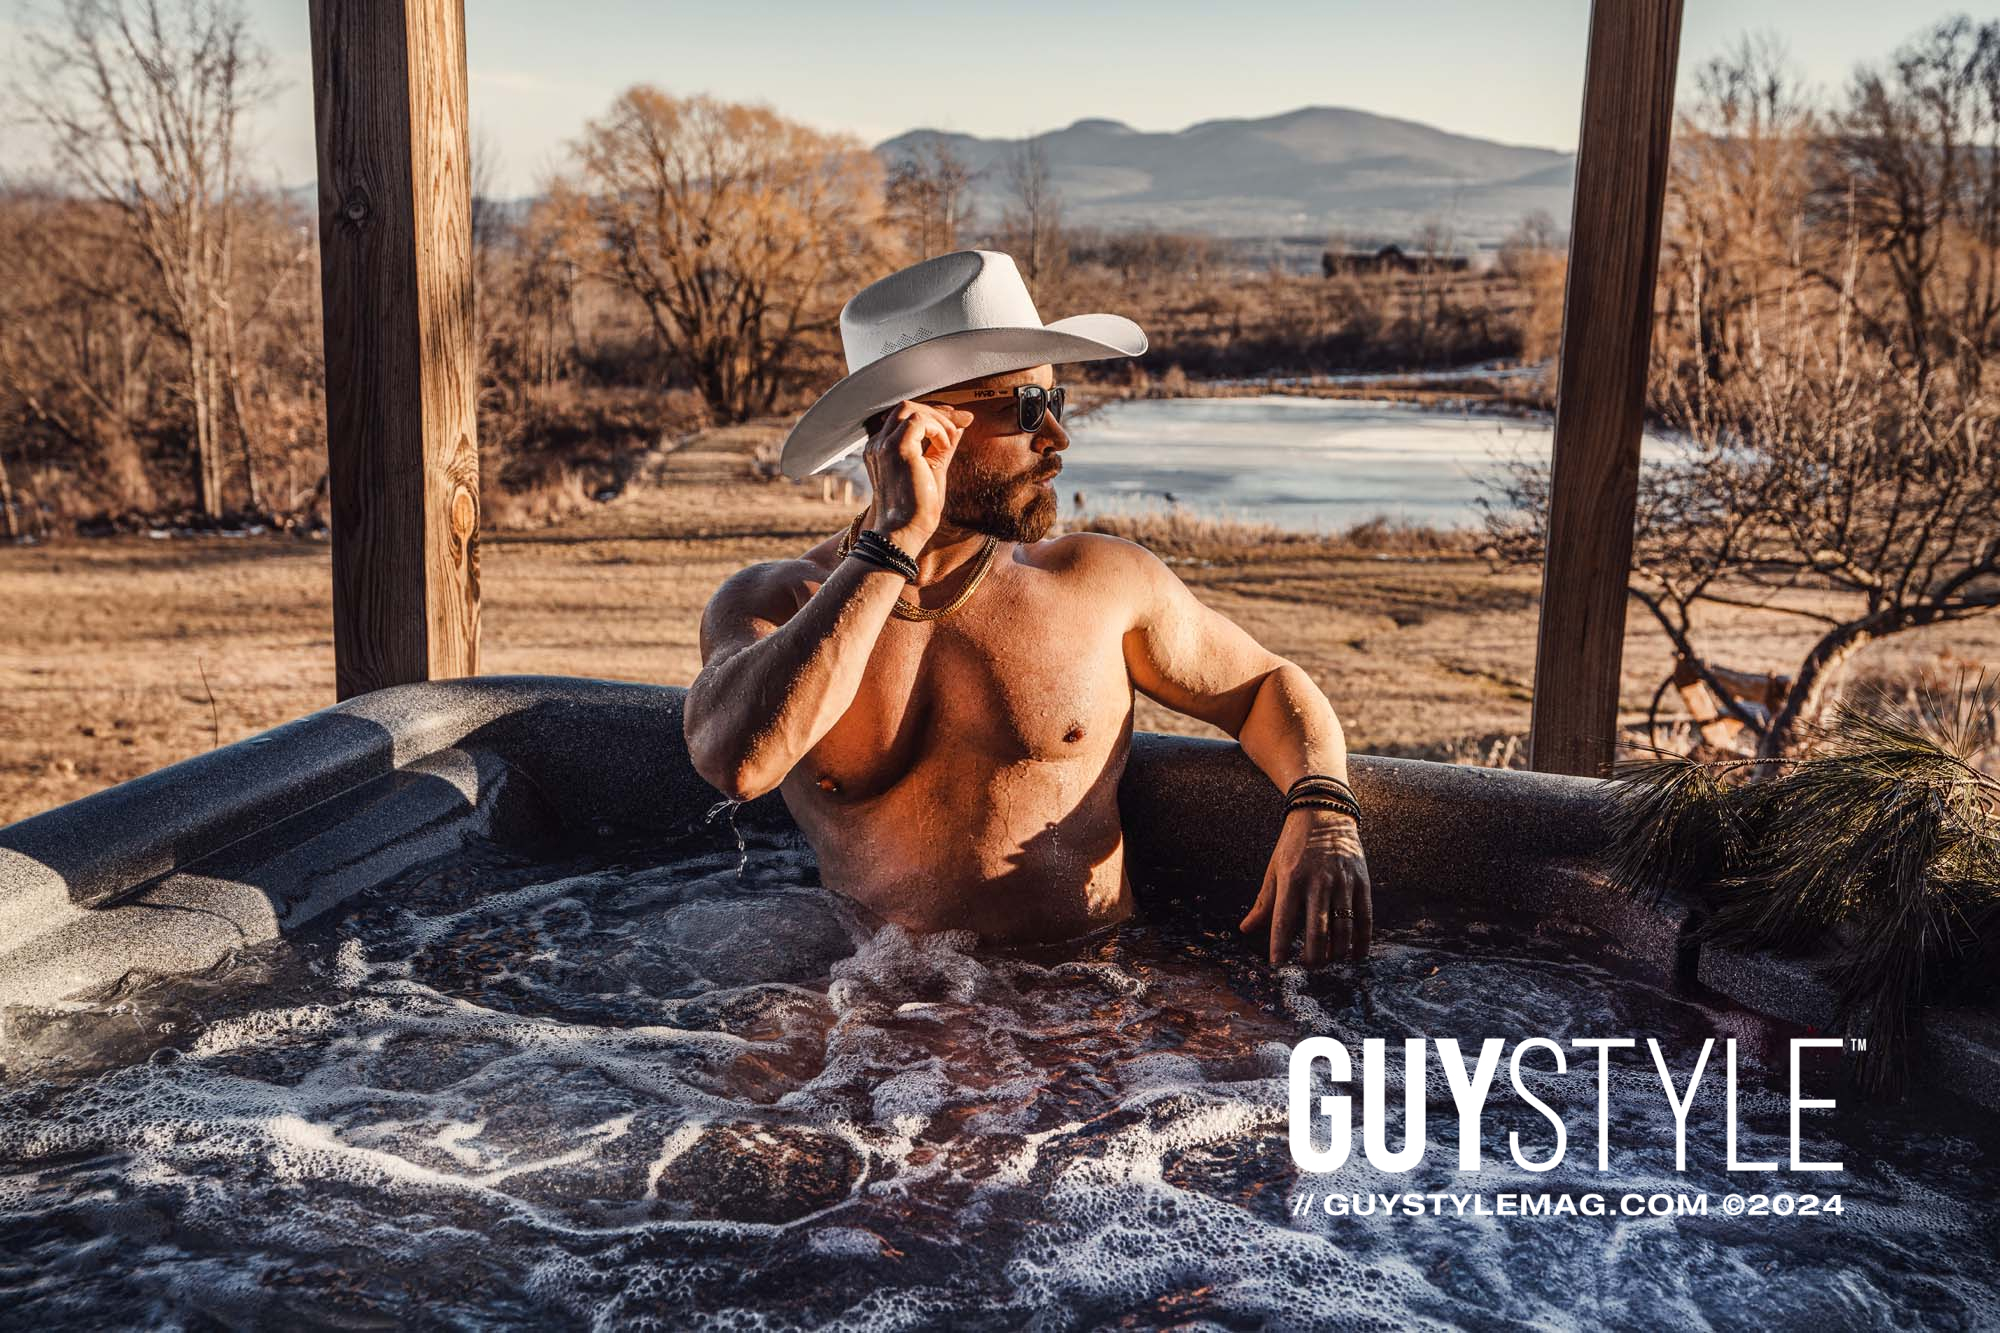 Embracing the Ethereal: "Cabin Life: Adventures of the Cocky Cowboy" by Maxwell Alexander – Male Boudoir – Homoerotic Art – Presented by Duncan Avenue Studios